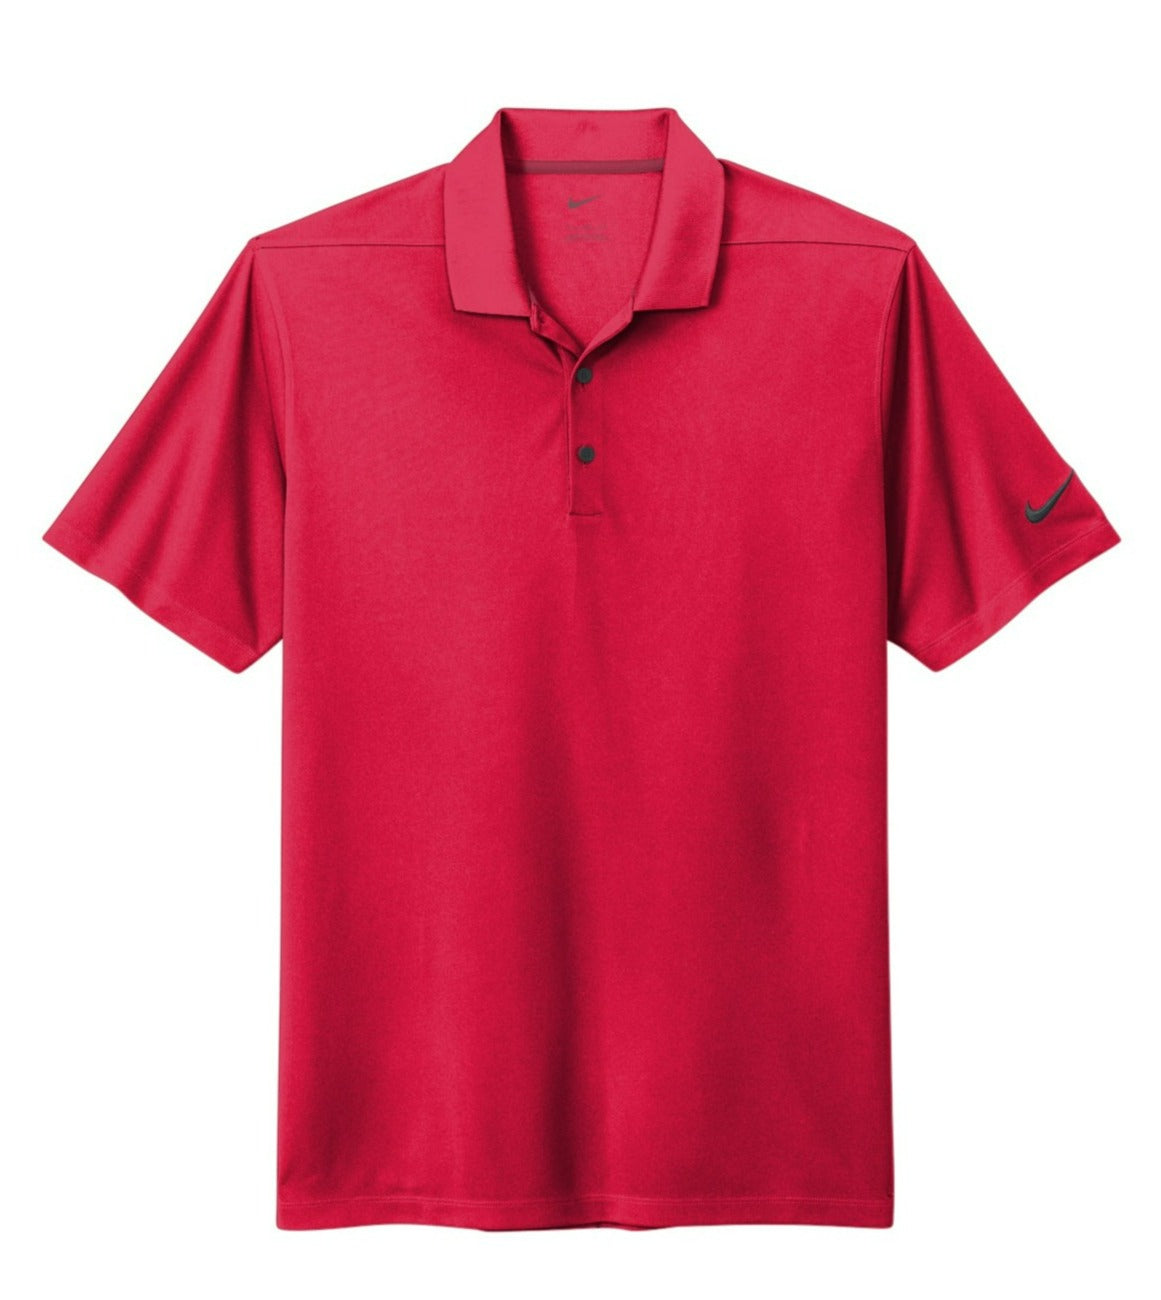 *Best* Nike Dry-Fit Polos